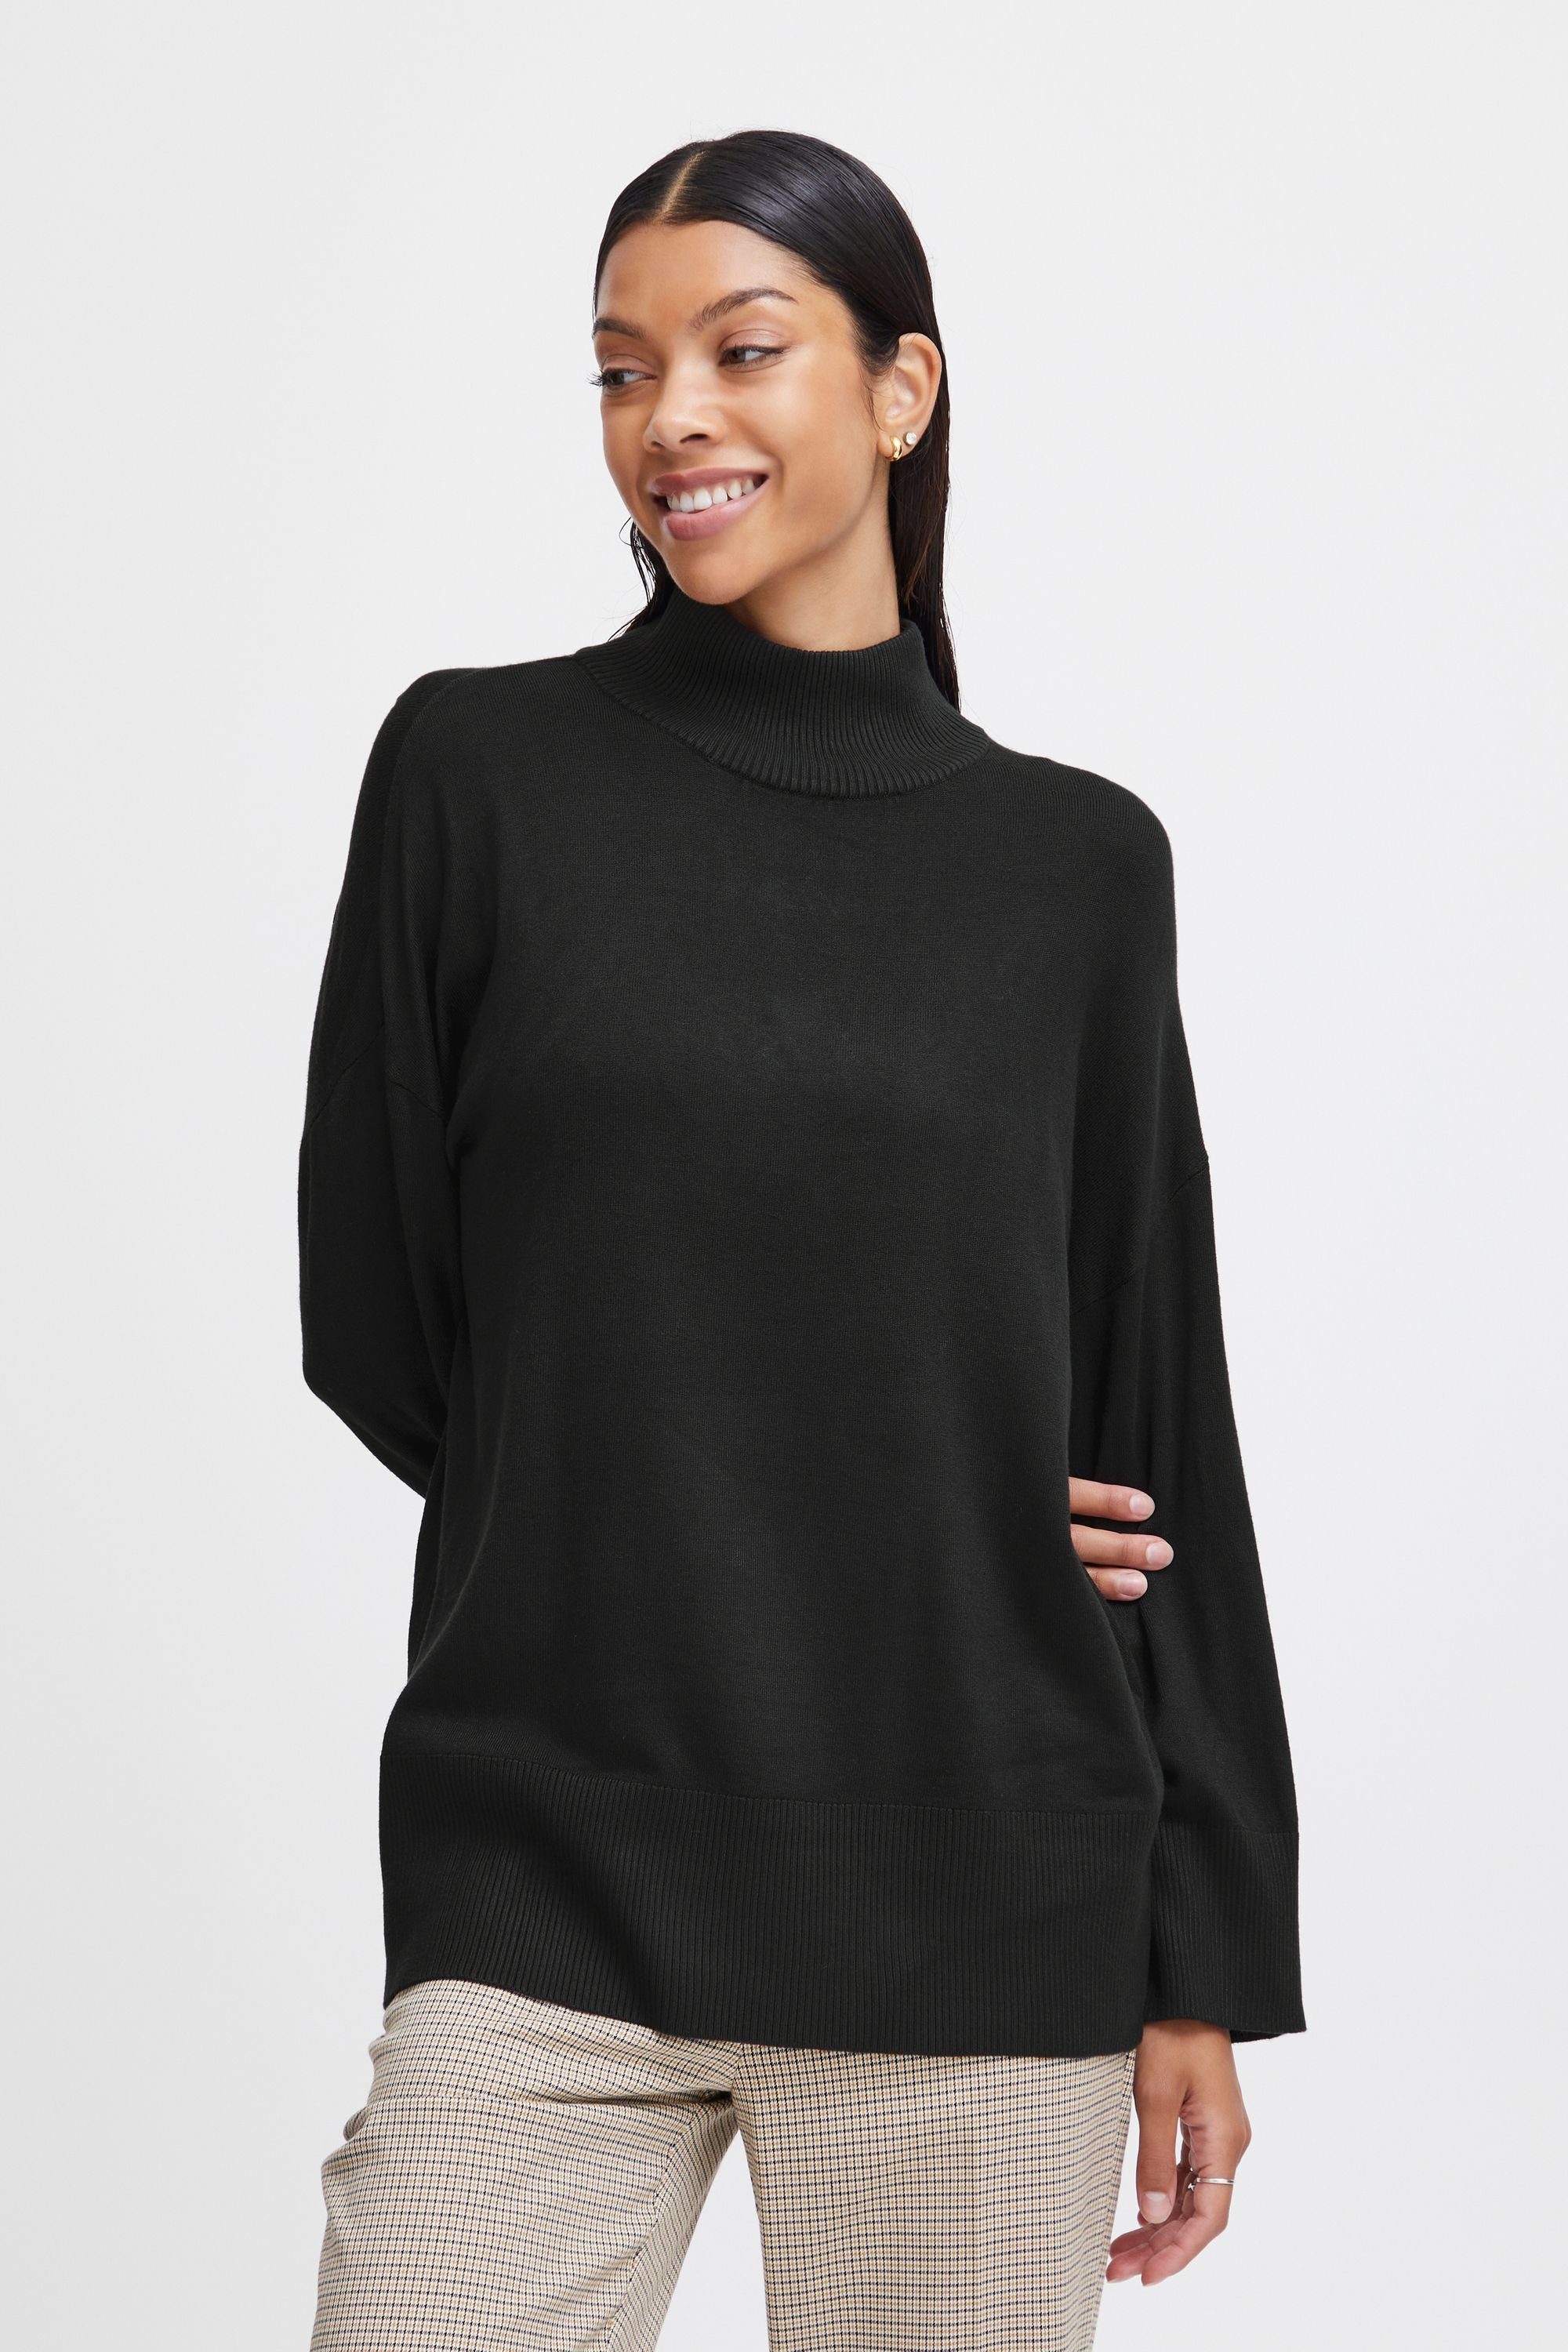 TURTLENECK (200451) - Black 20813512 LOOSE Strickpullover b.young BYMMPIMBA1